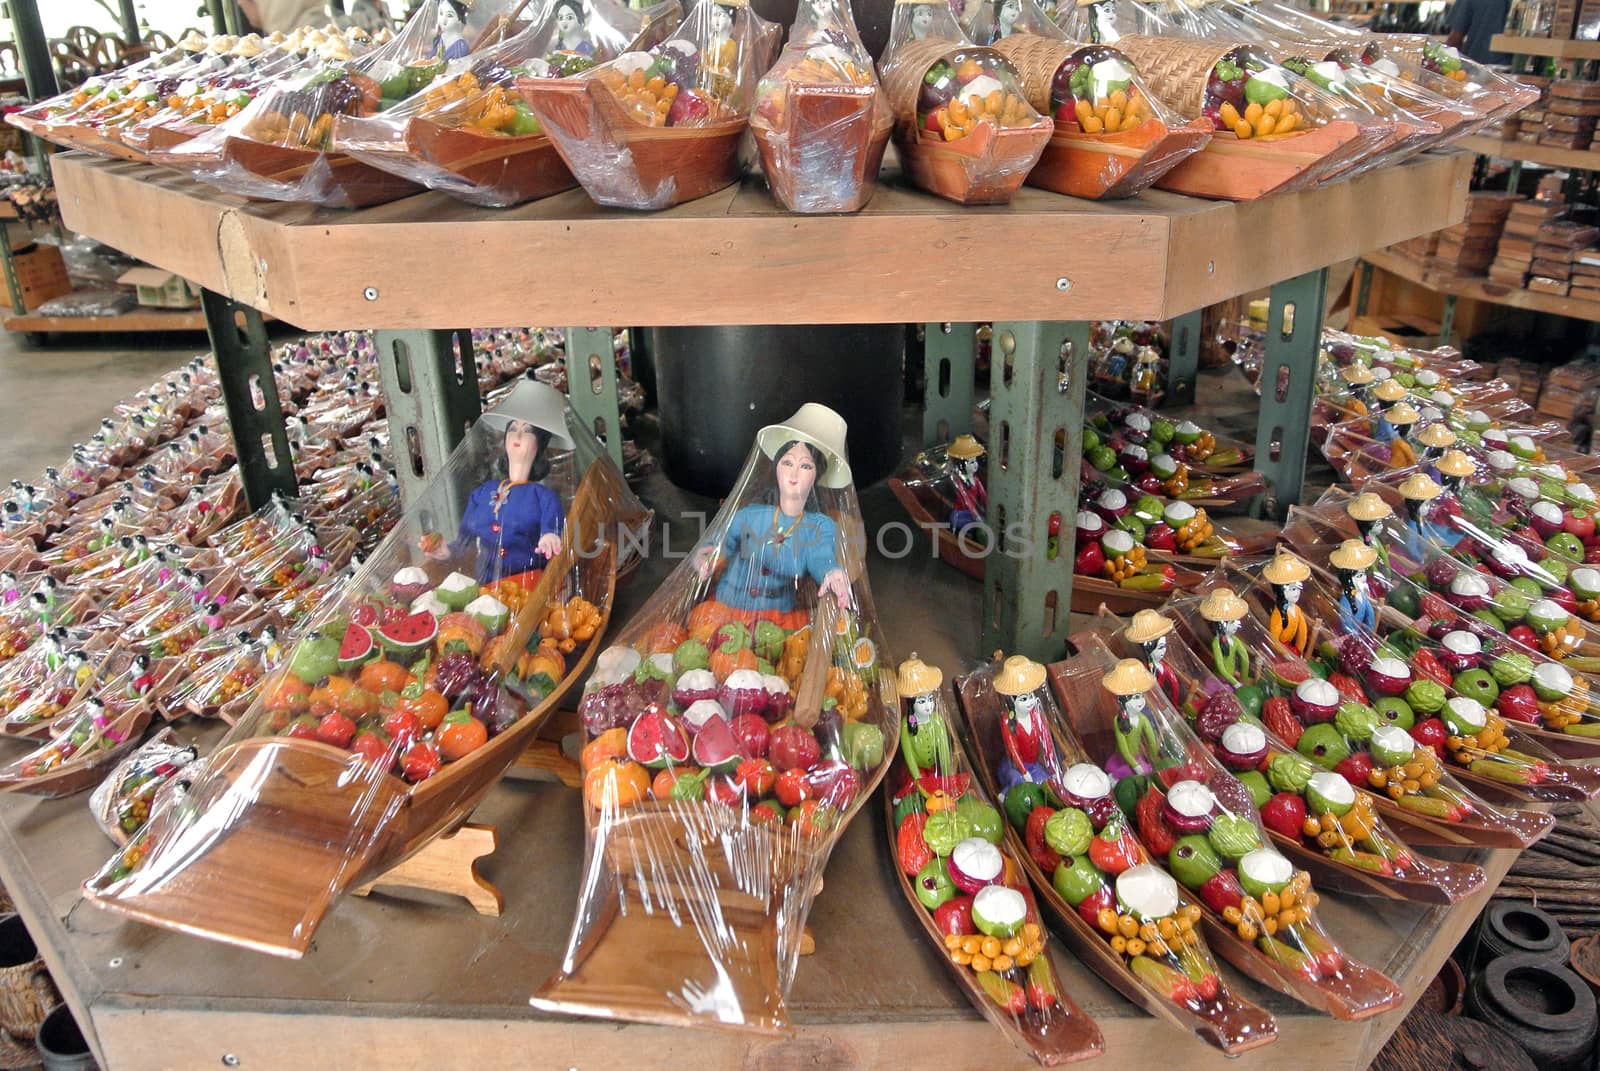 souvenir in floating market, Thailand. by think4photop